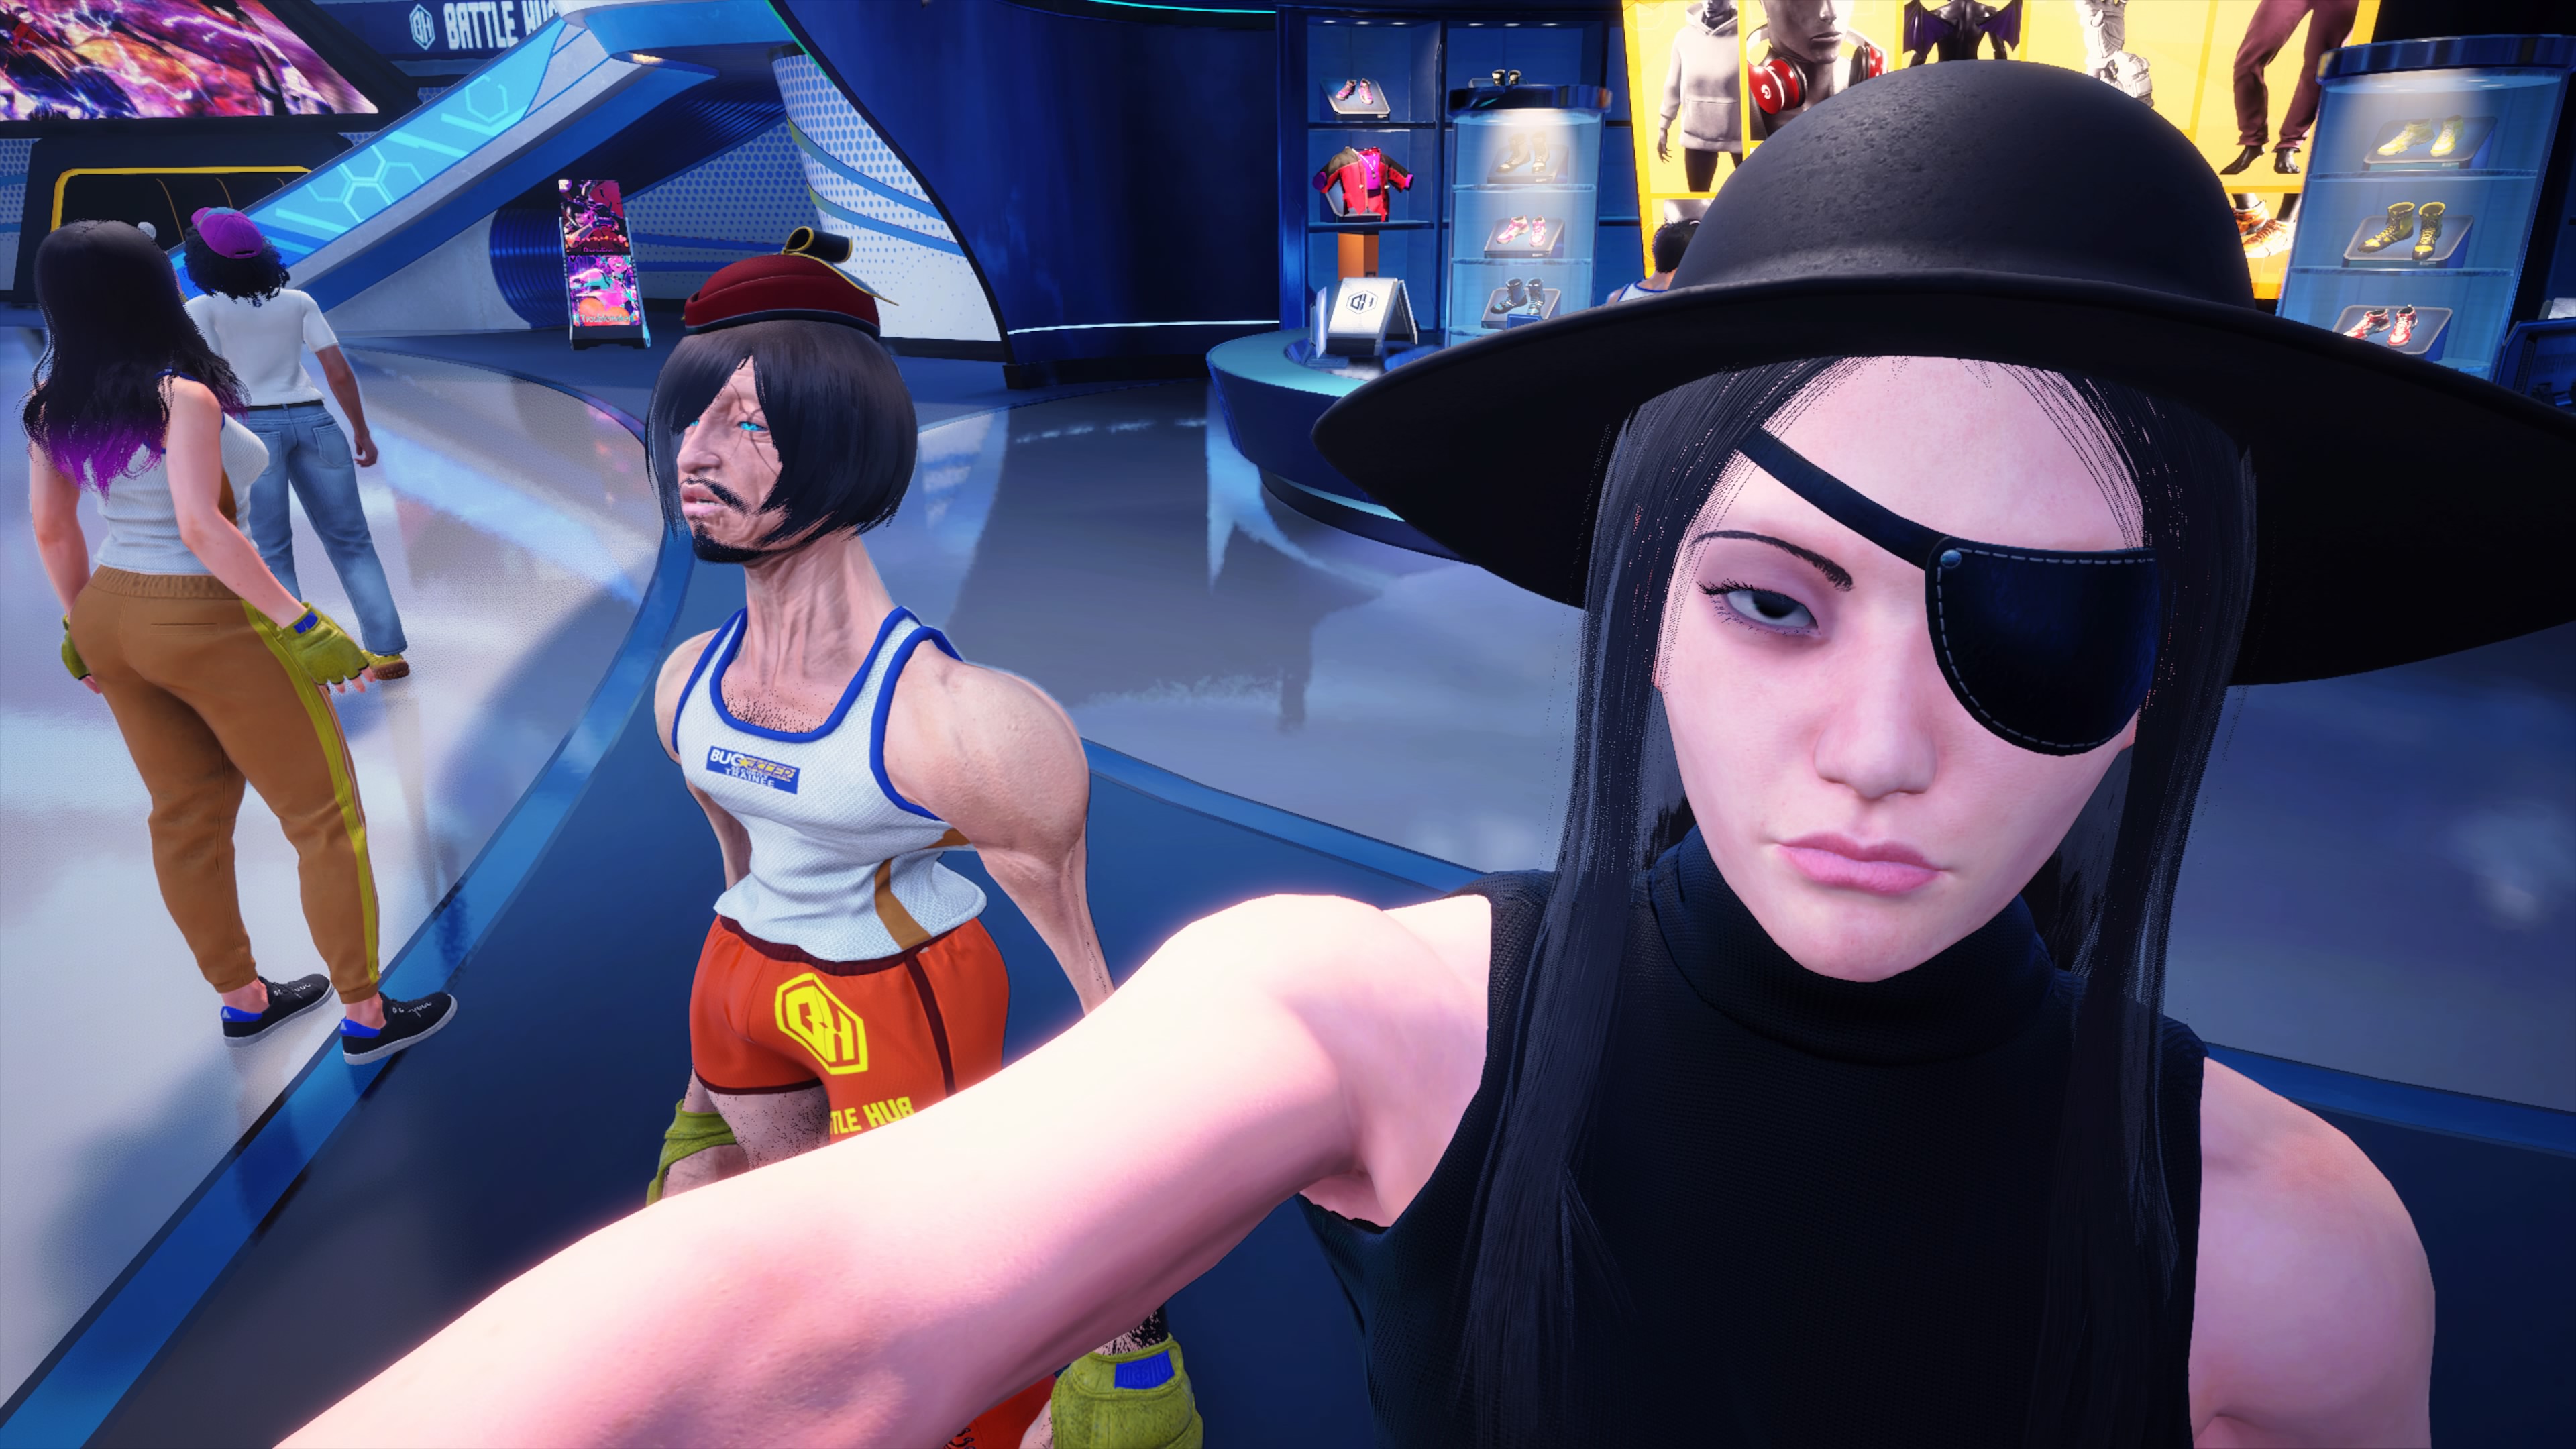 Review: 'Street Fighter 6' is a bold revamp that widens the fanbase